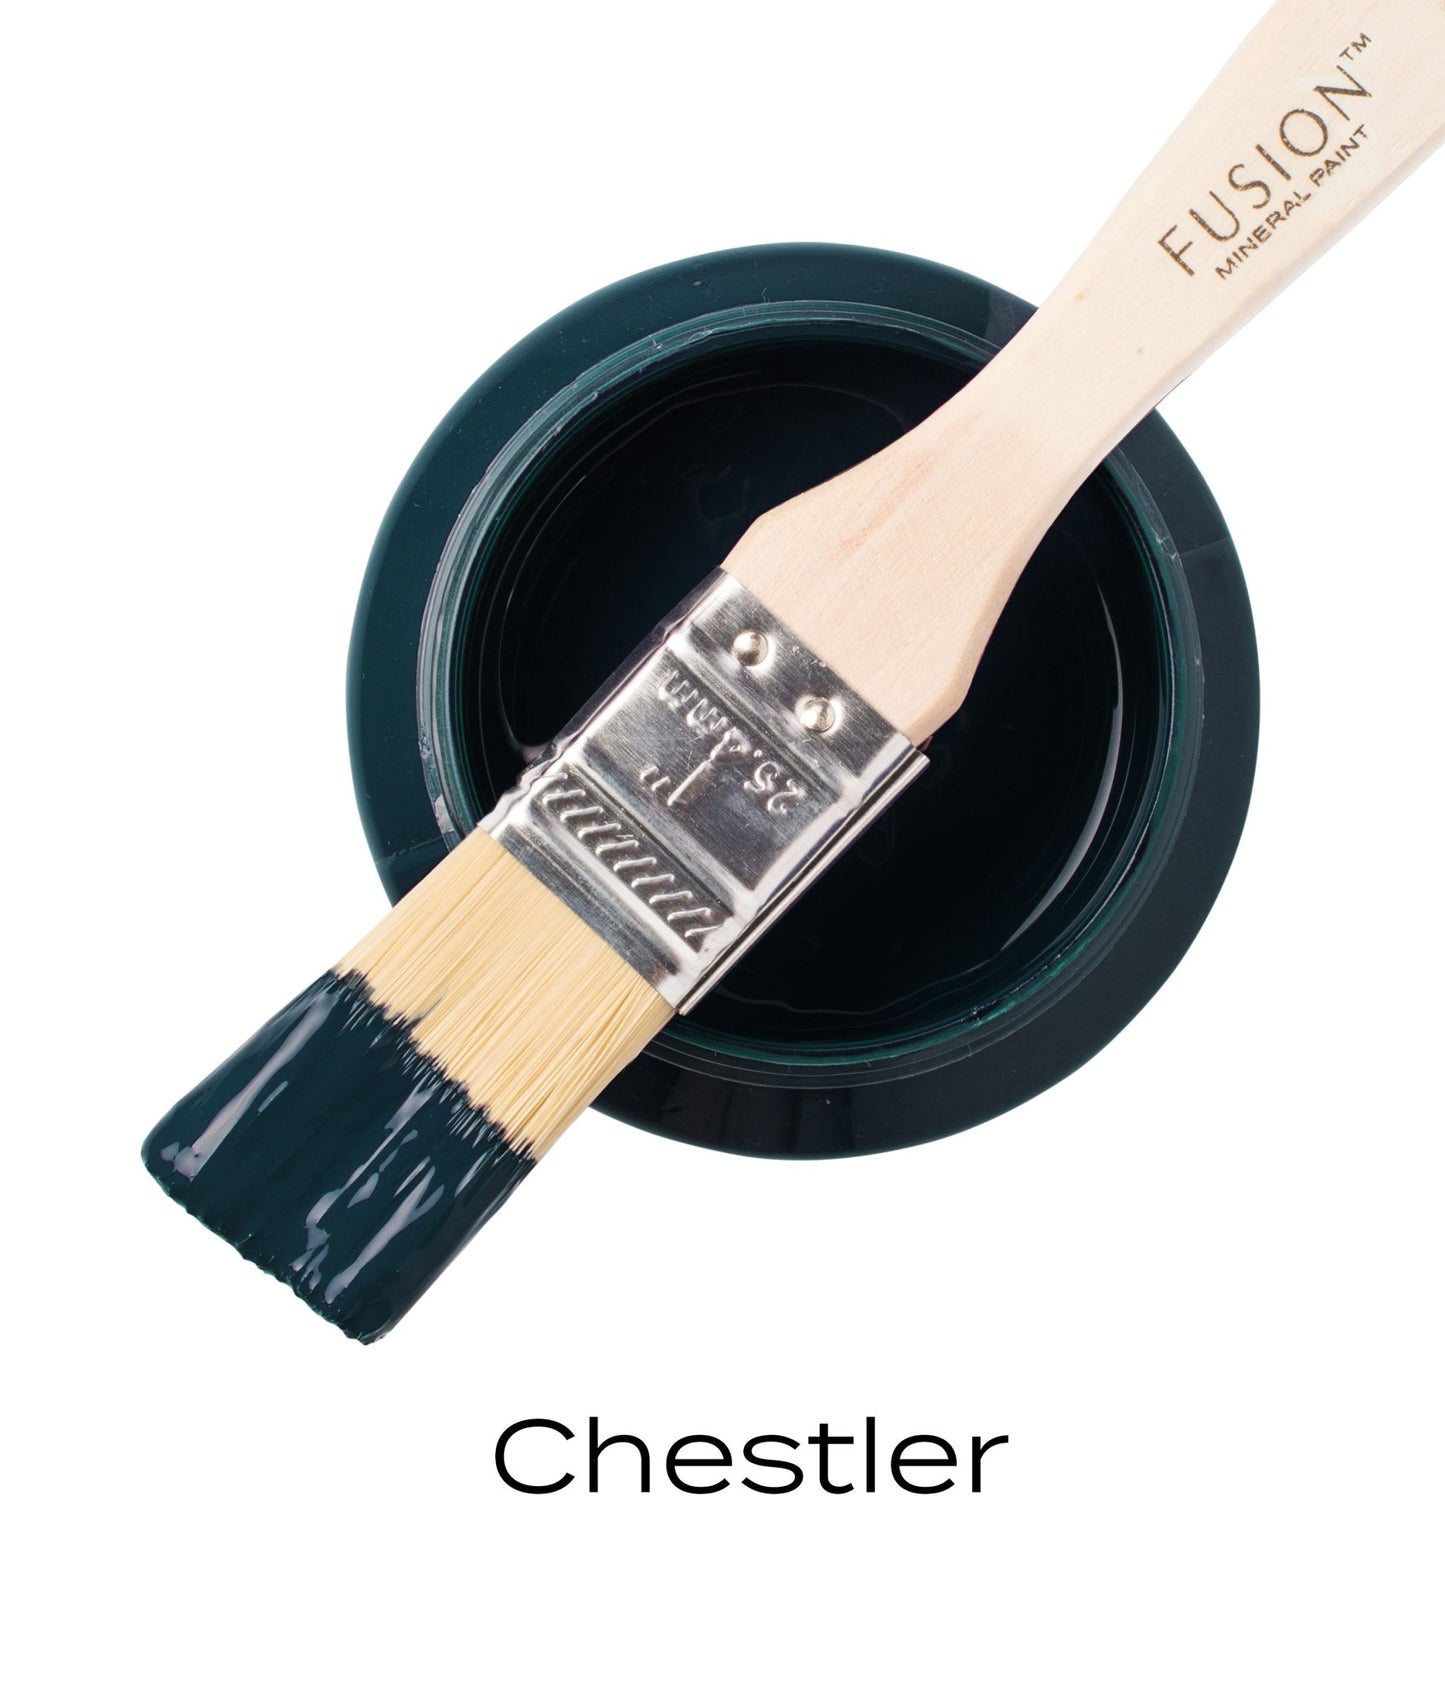 Fusion Mineral Paint - Chestler - Rustic River Home